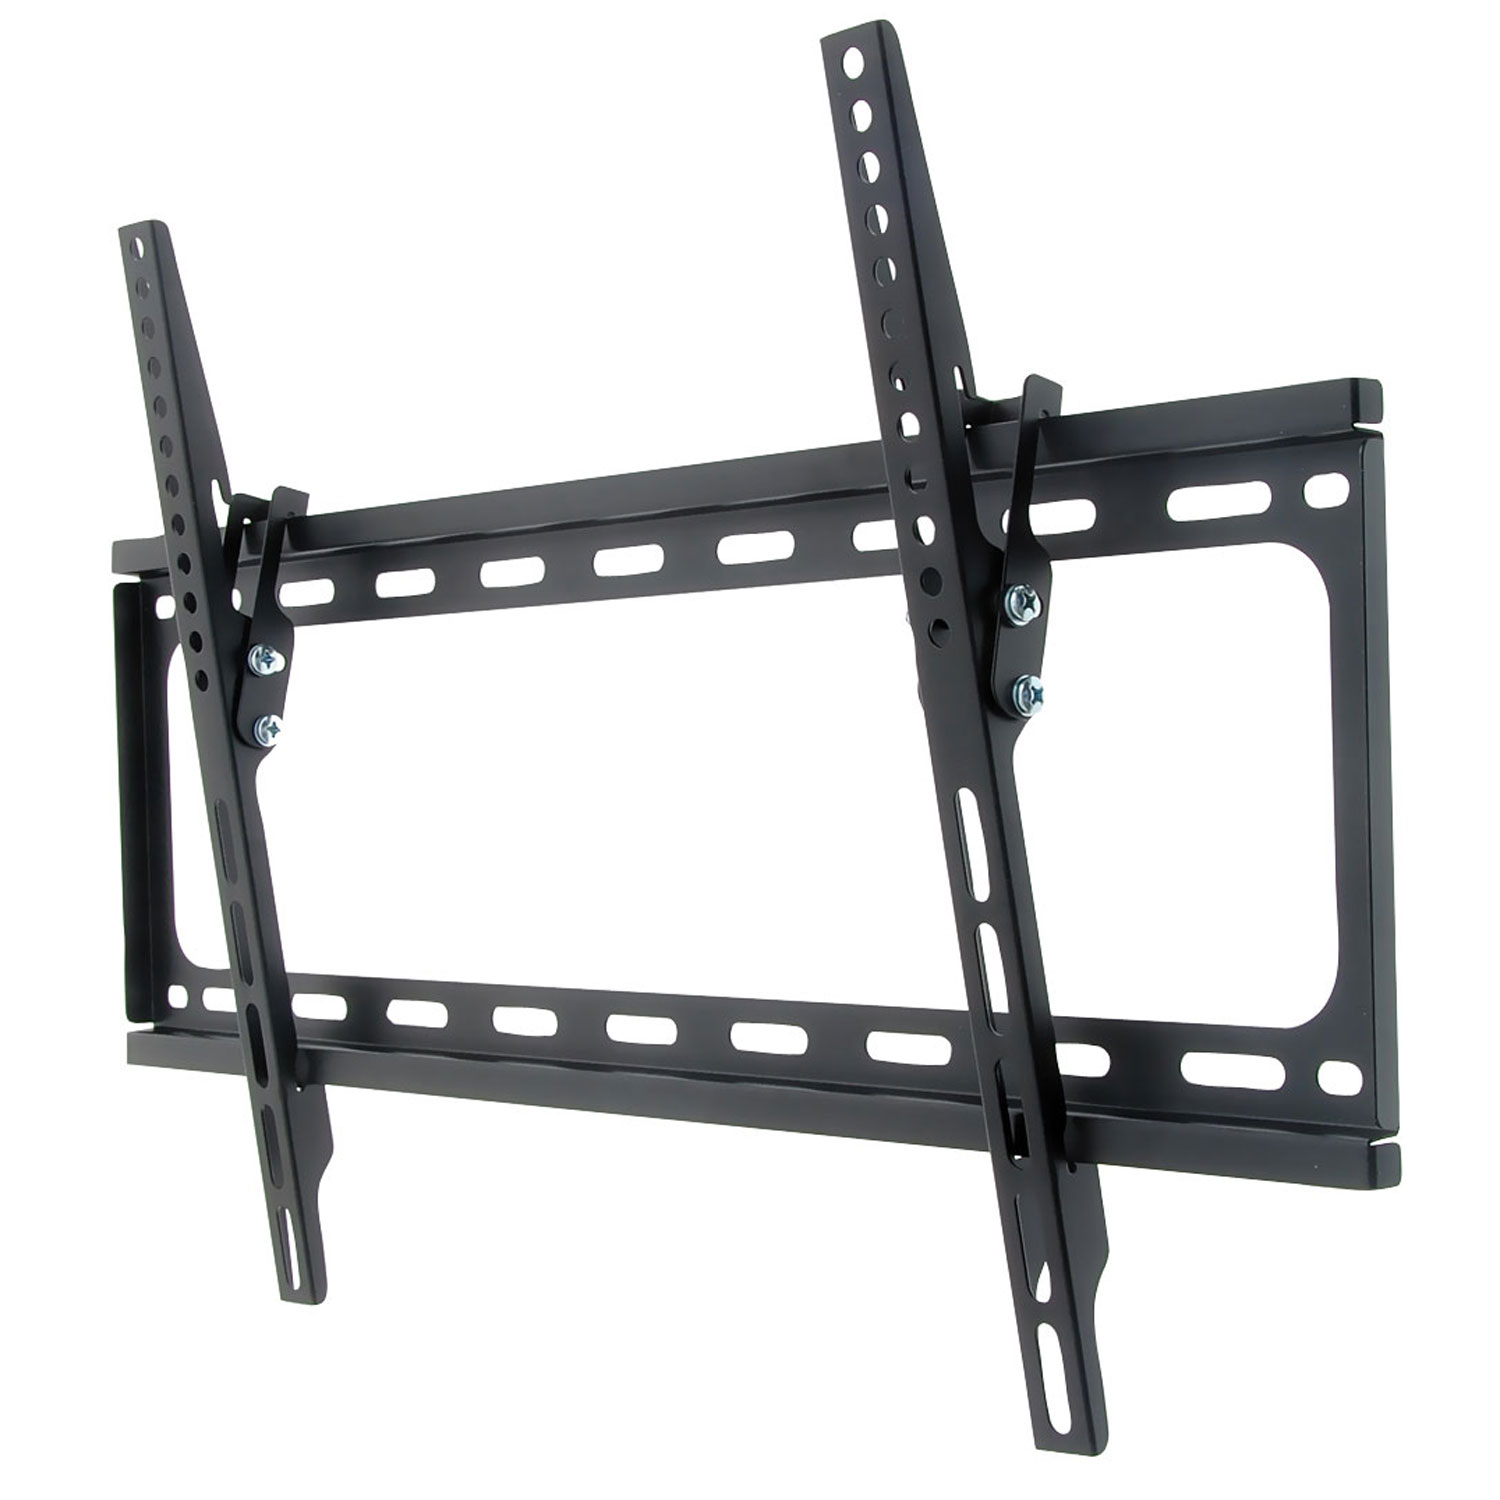 Pyle Universal TV Mount - fits virtually any 32" to 55" TVs including the latest Plasma, LED, LCD, 3D, Smart & other flat panel TVs - image 1 of 1